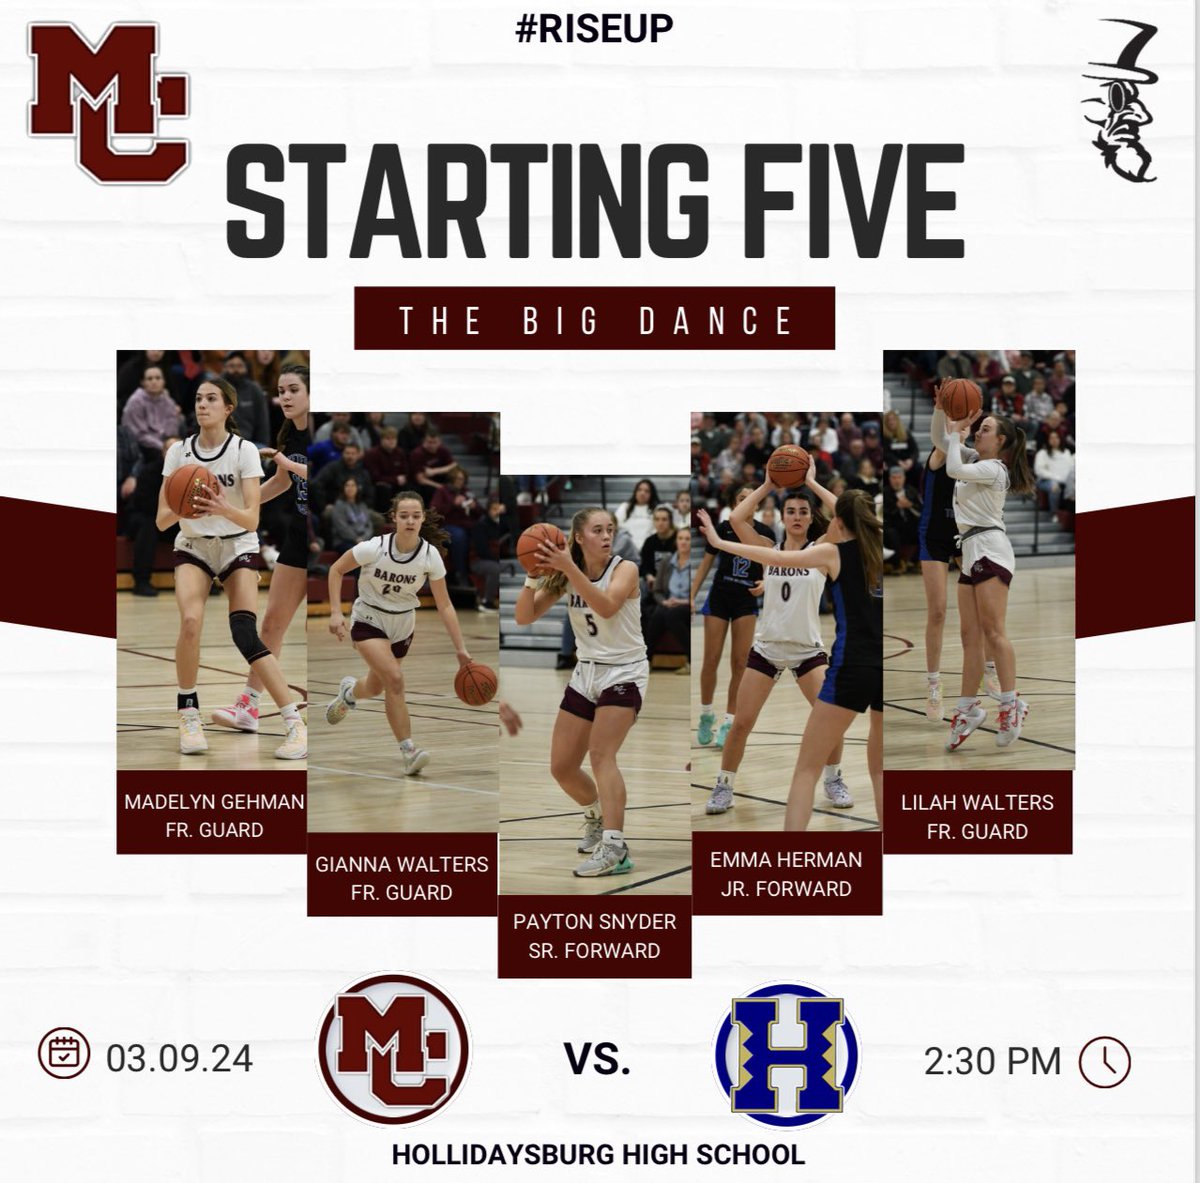 Your Lady Barons starting lineup for today’s PIAA 5A Girls’ Basketball Championship First Round State Playoff Game vs. Hollidaysburg! #RISEUP 🏀